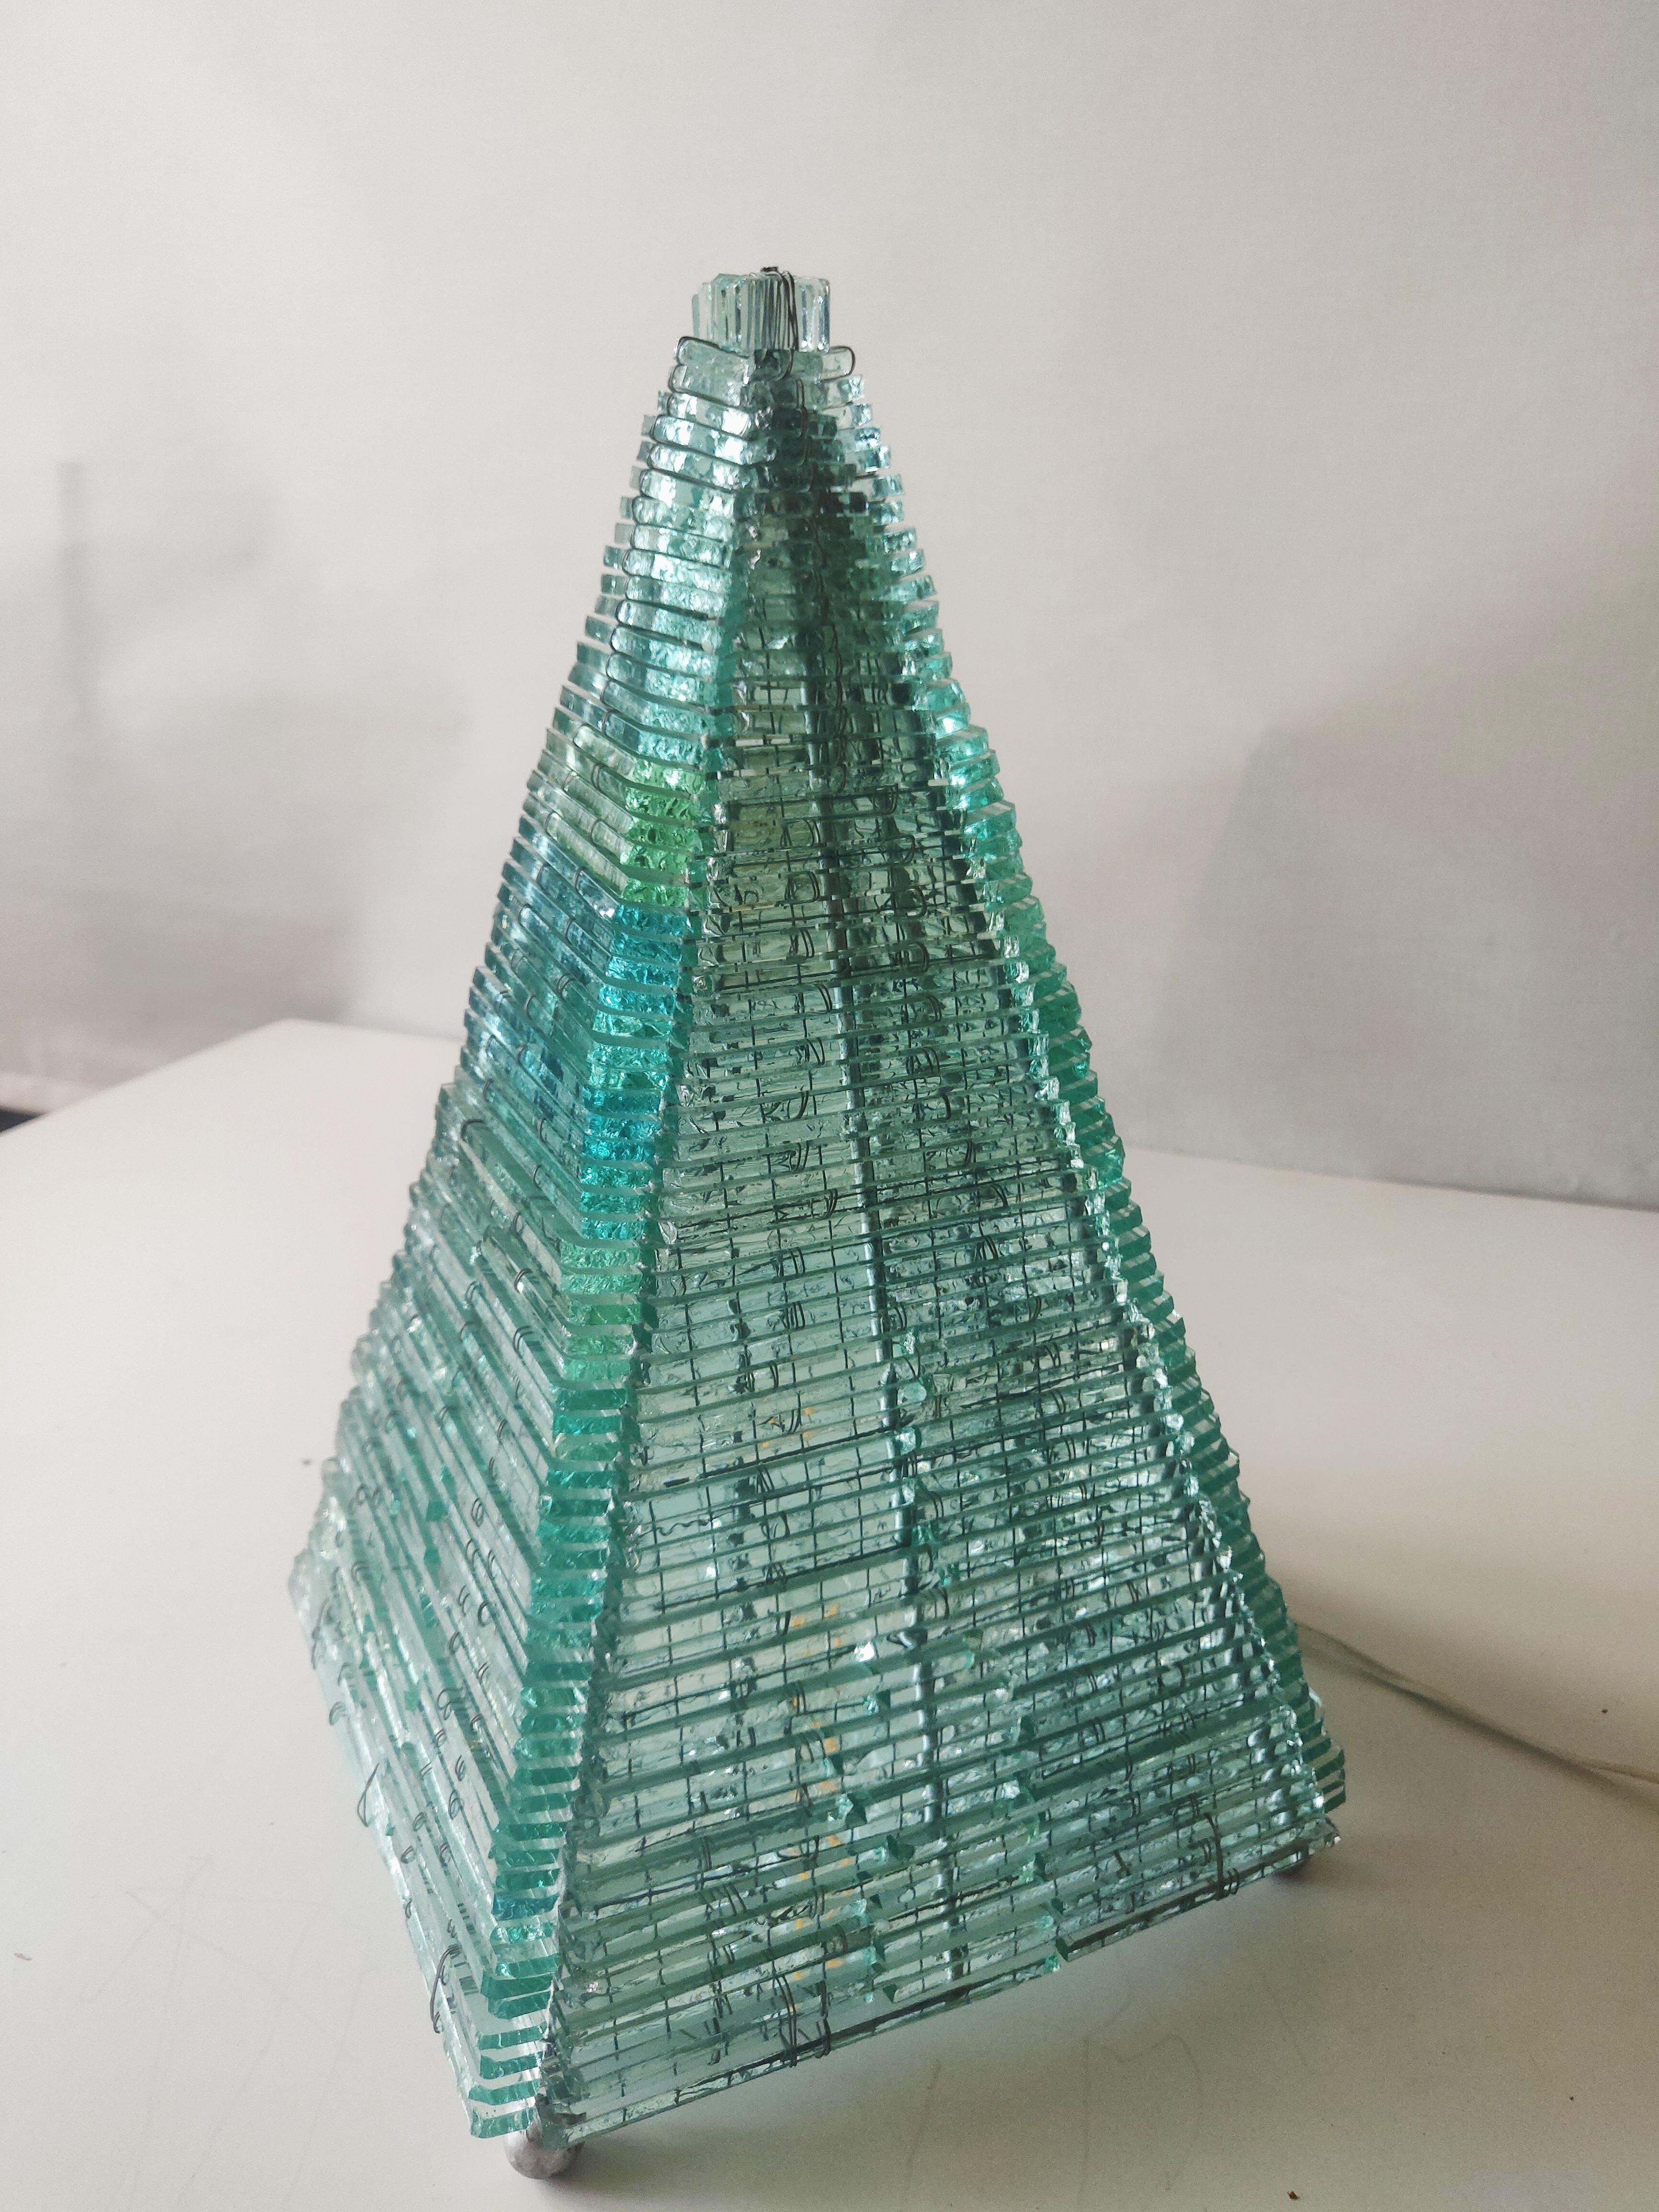 Glass Pyramid Sculptured Table Lamp France, 1970s For Sale 5